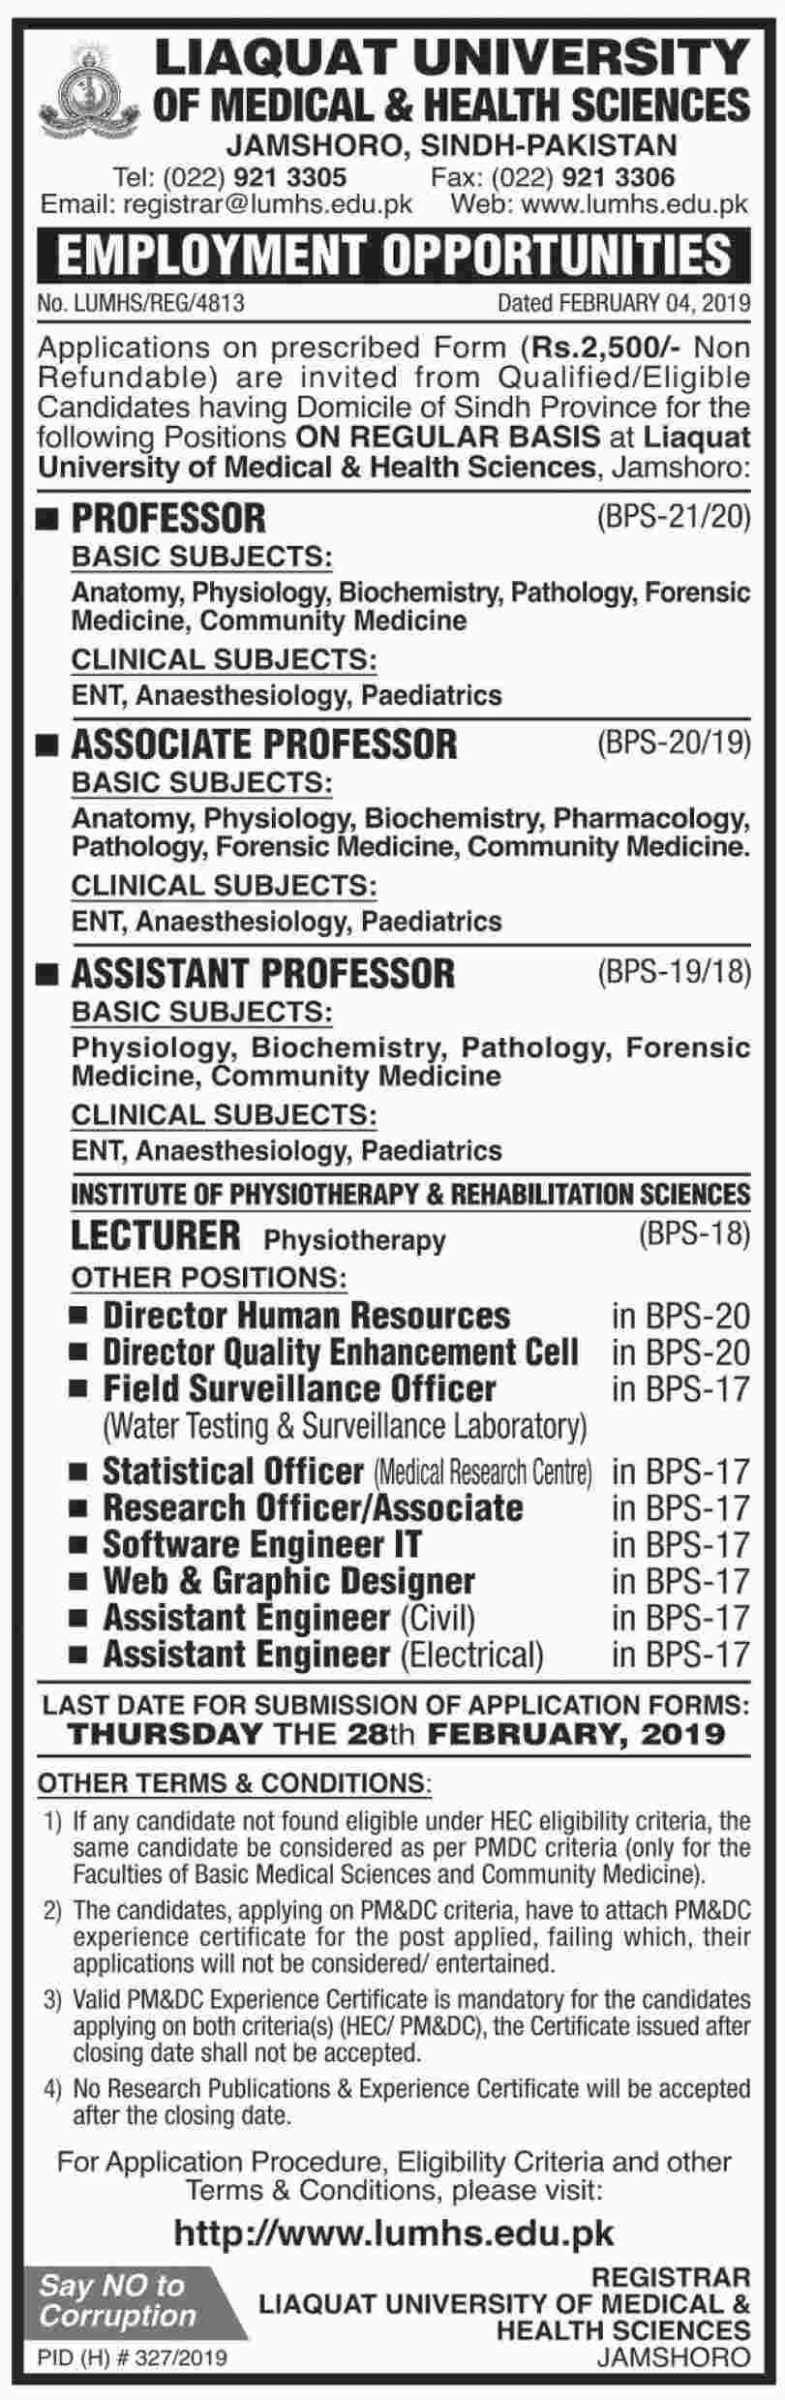 Liaquat University of Medical & Health Sciences (LUMHS) Jobs 2019 for IT, Engineering, Research, Management & Teaching Faculty